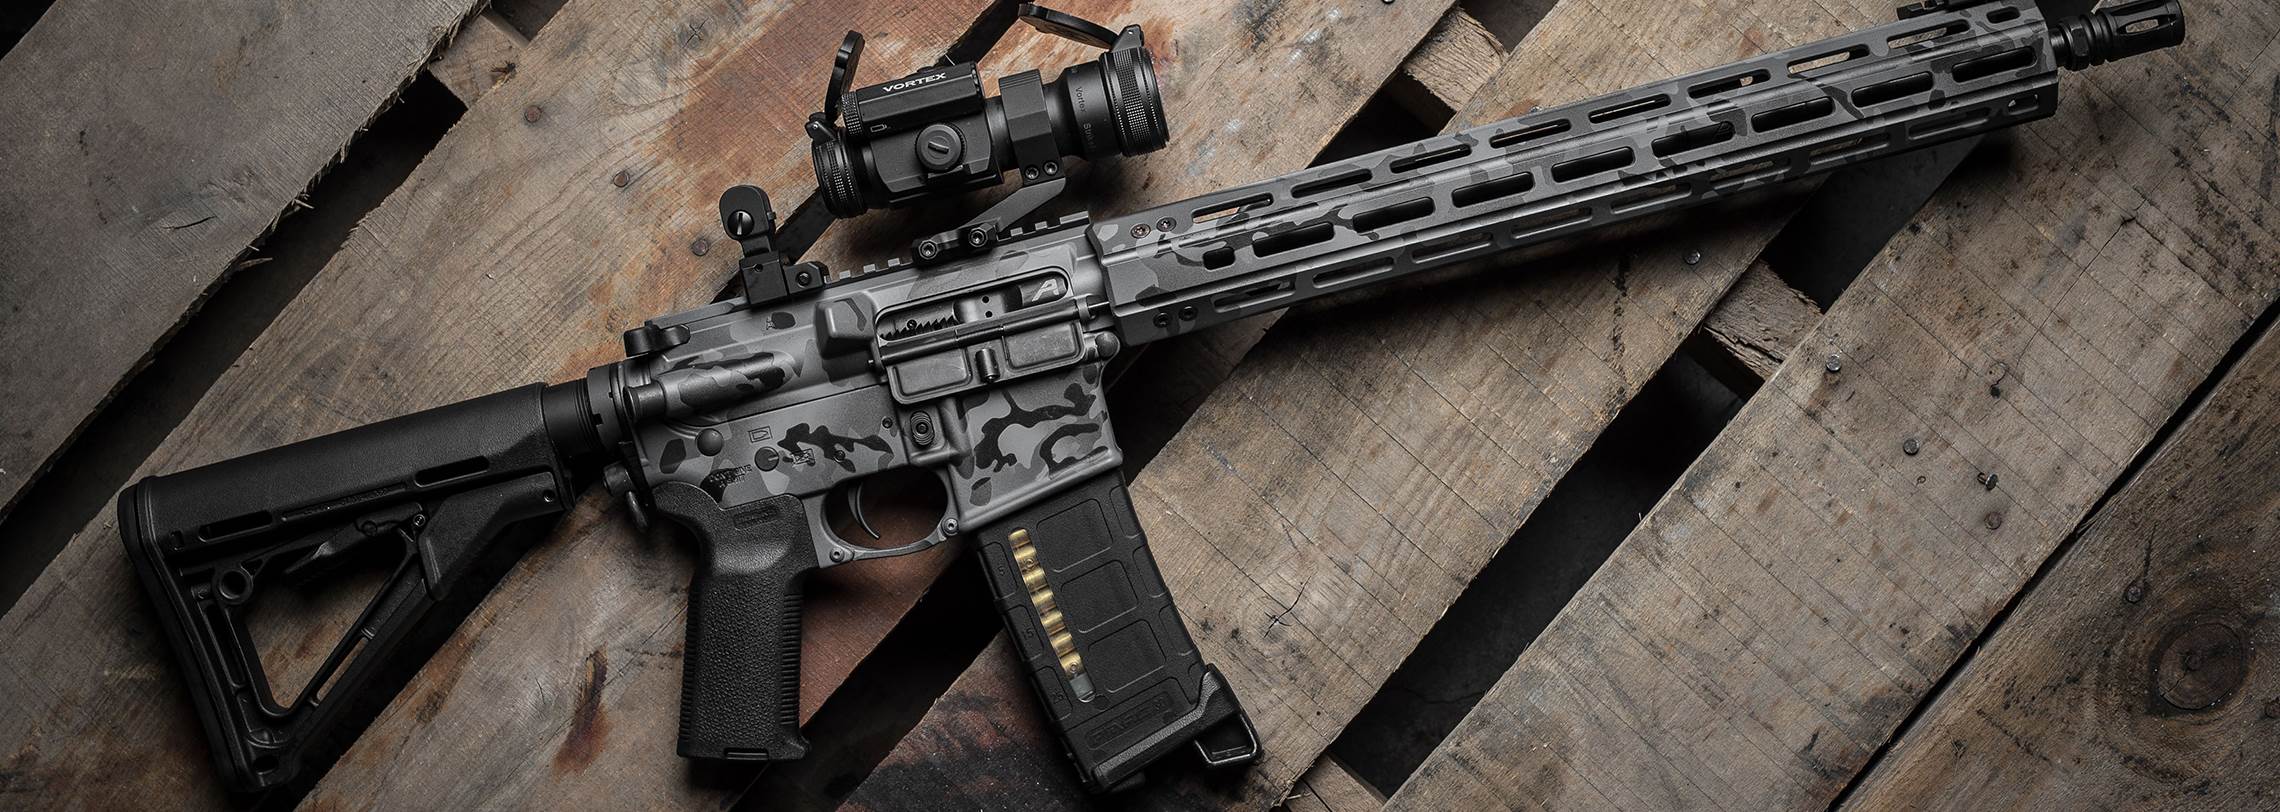 Black Rifle Depot: Your AR-15 Parts Destination in Bakersfield